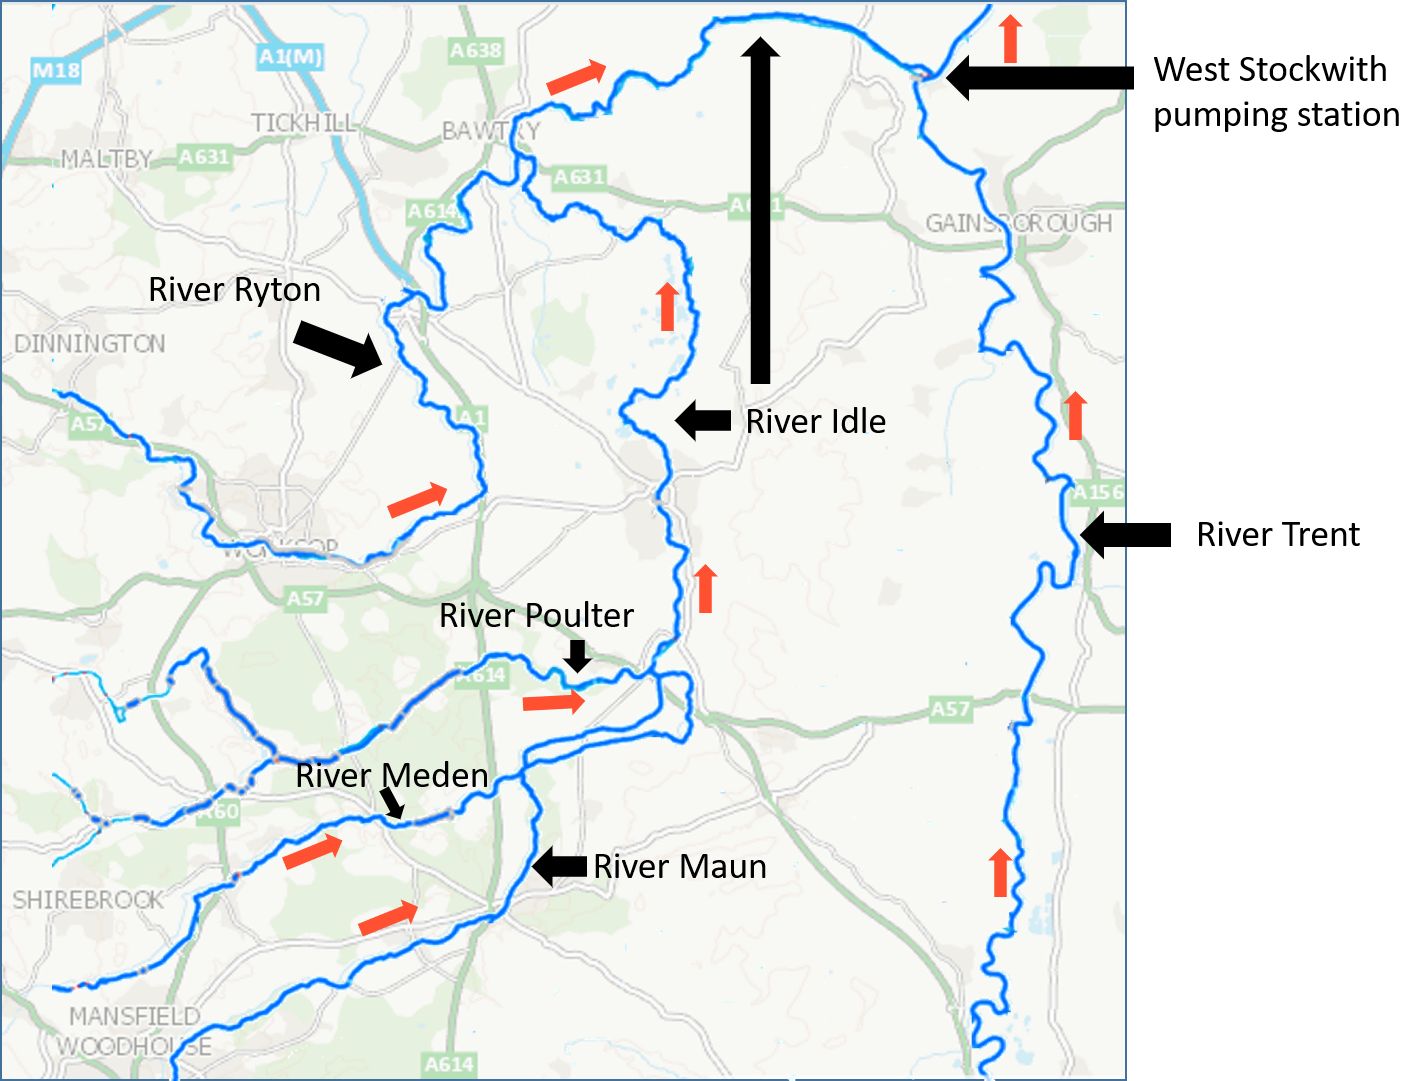 A map showing the River Maun, River Meden, River Poulter, River Ryton, River Idle and River Trent, as well as West Stockwith pumping station..